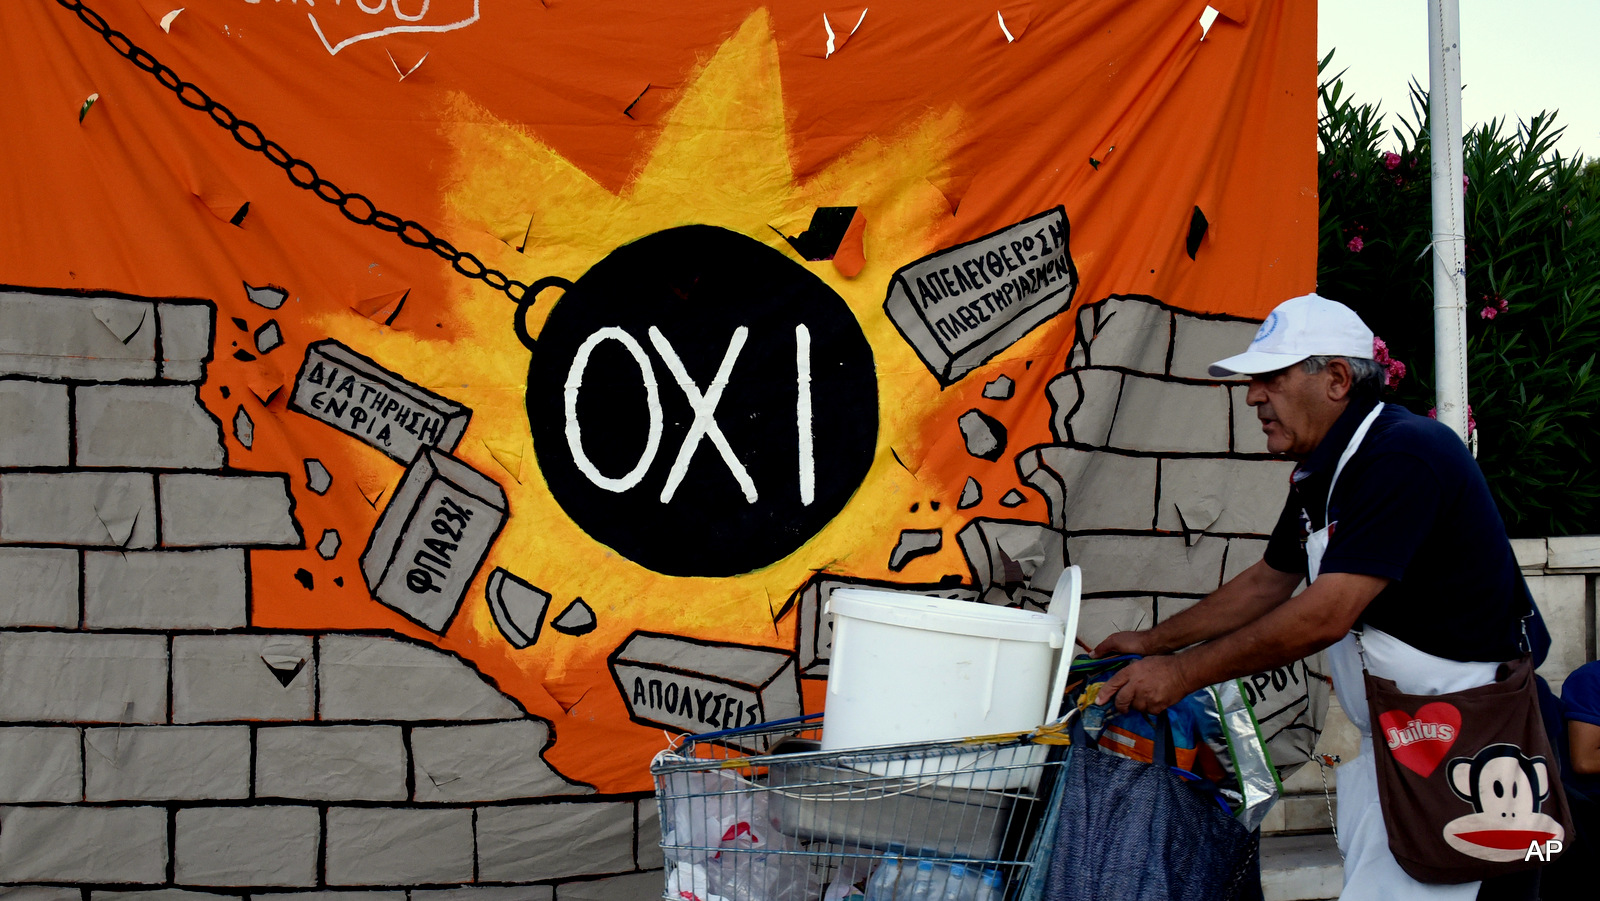 A street vendor pushes his trolley as he passes a banner, depicting a wrecking ball that reads: "NO" and destroying a wall with anti-austerity measures, in Athens, Wednesday, July 22, 2015. Barely a week after their last crunch vote, Greek lawmakers are set to vote later Wednesday on further economic reforms demanded by international creditors in return for a new financial bailout. 